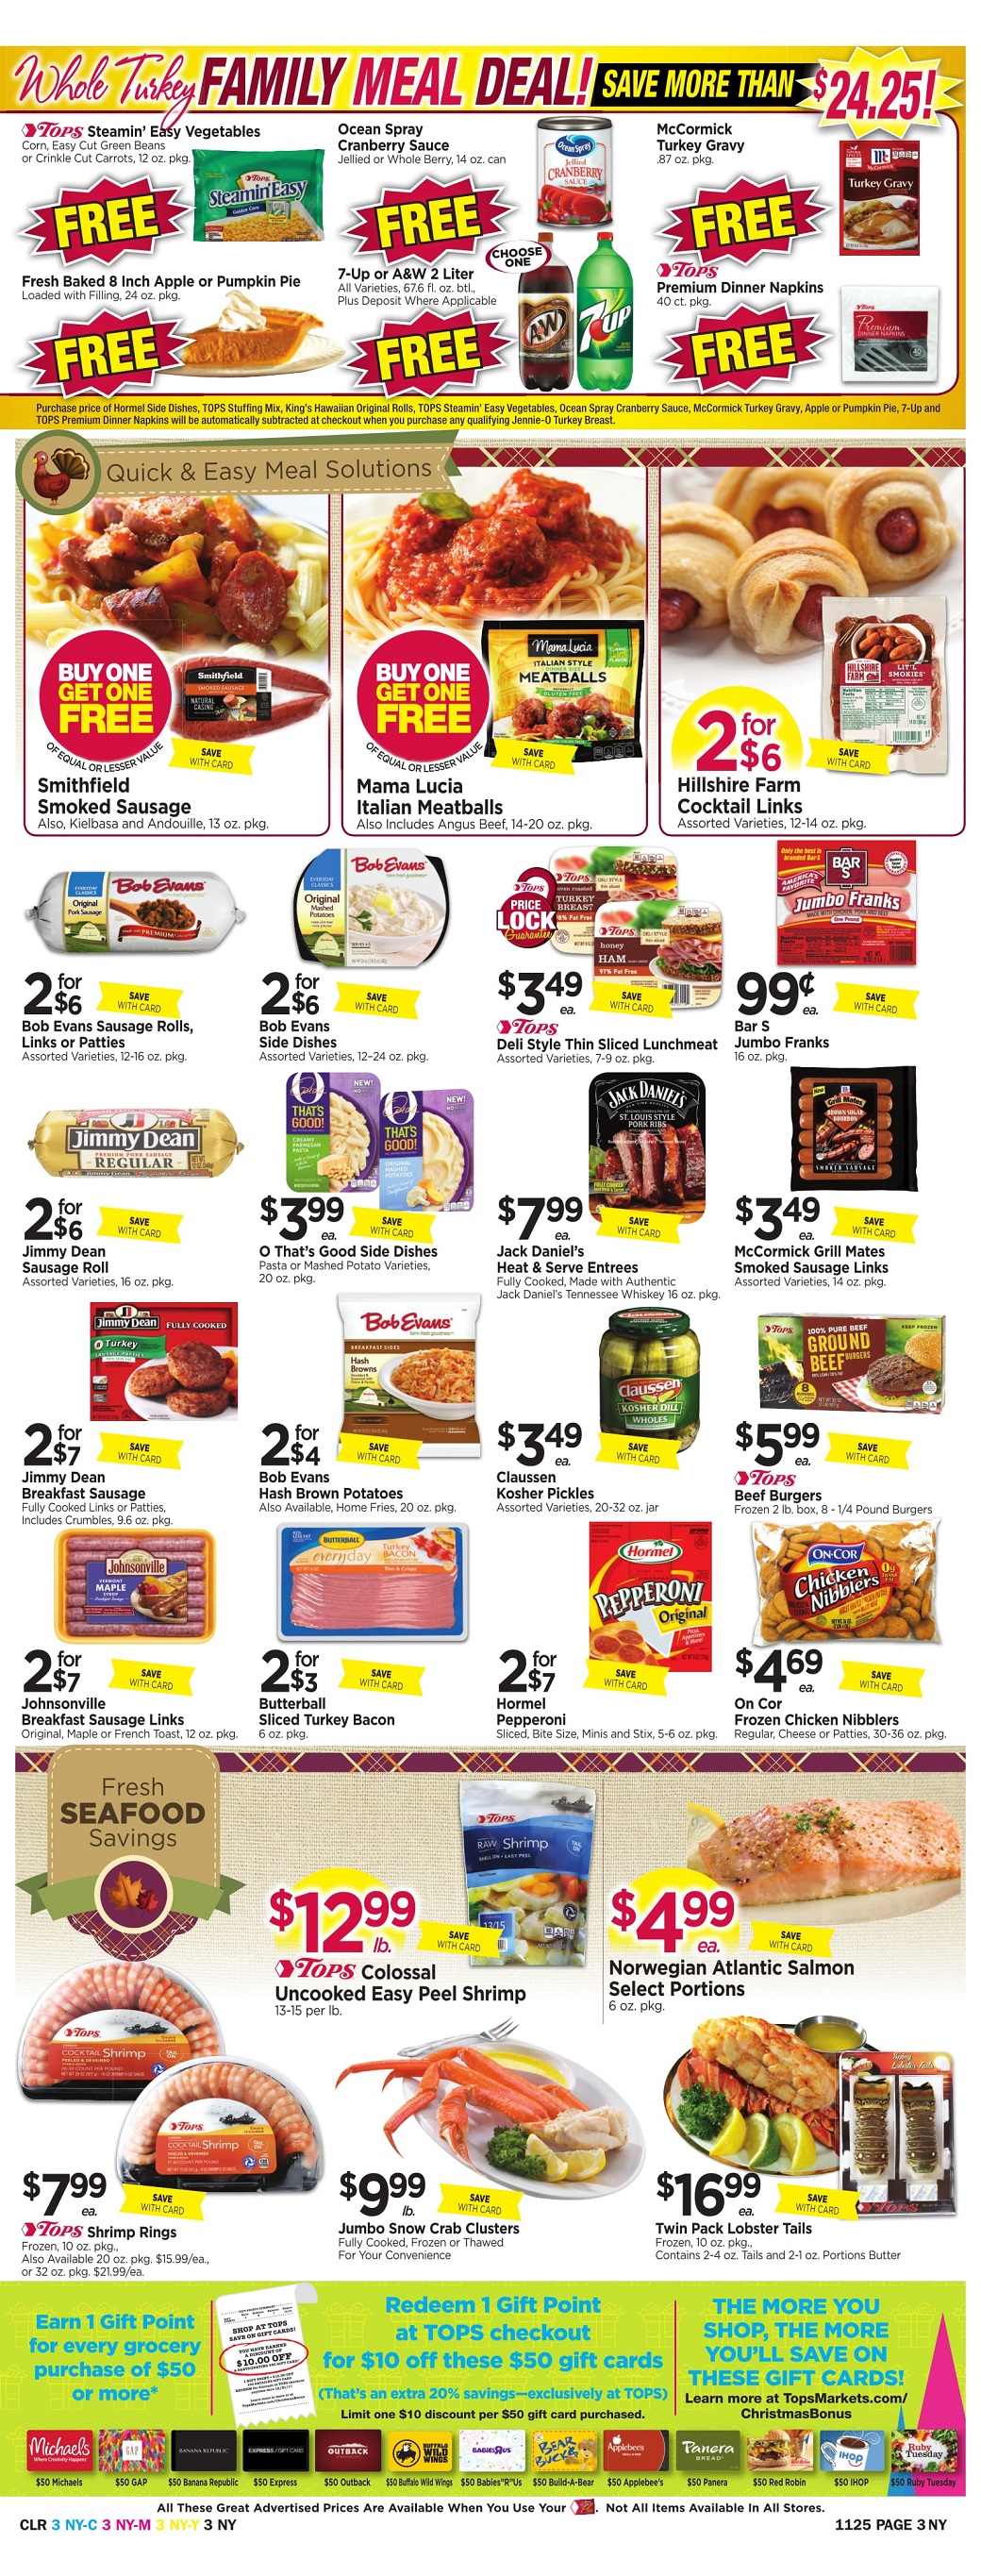 Tops Markets Ad Scan Week 11 19 Page 3